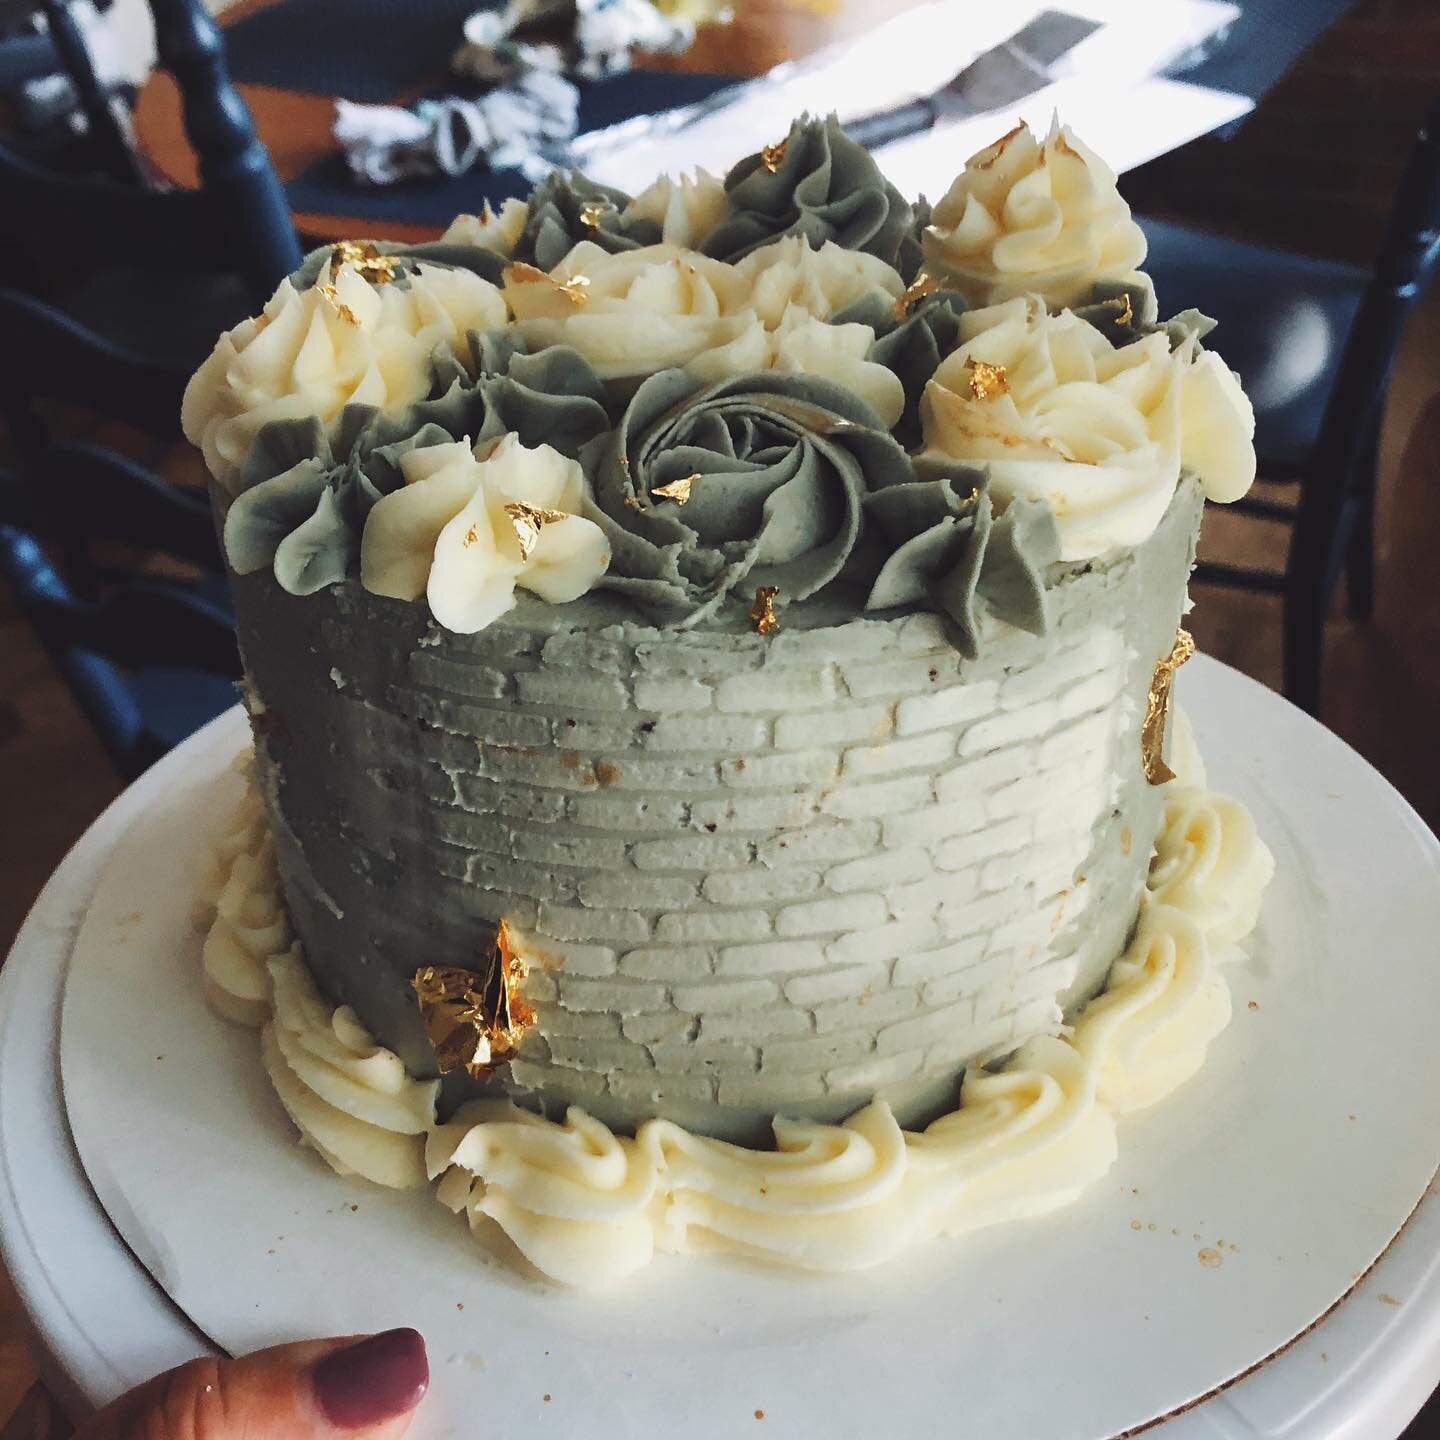 A mini birthday cake for my sister in law! I&rsquo;m not sure if it&rsquo;s because fall is creeping this way but I&rsquo;m loving the grey buttercream these days.